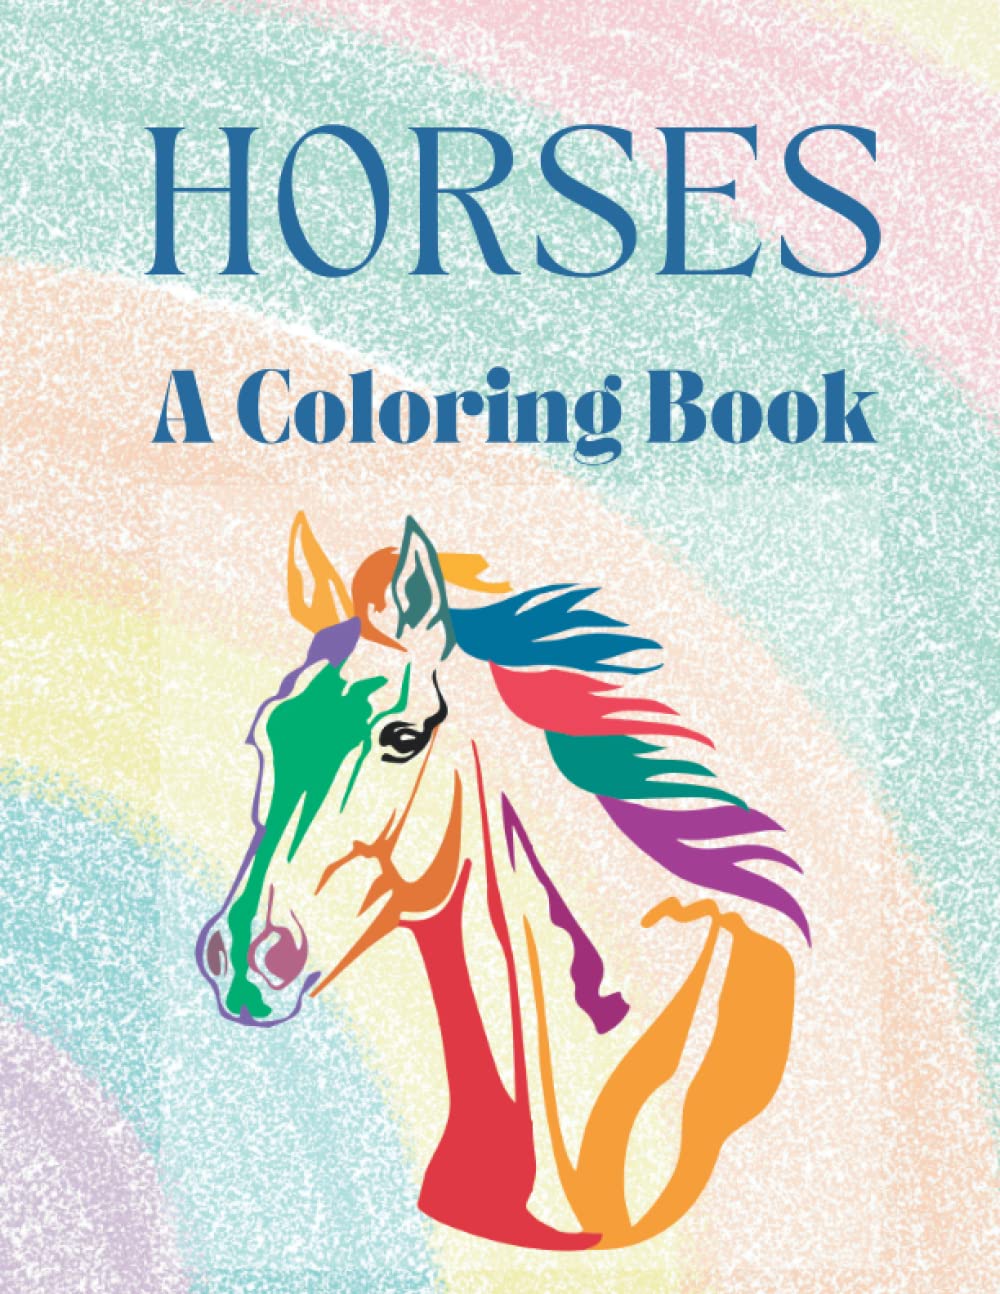 Horses: A Coloring Book: Horse coloring book for girls ages 8-12, Horse coloring book for adults and young teens, Stallion Coloring Book